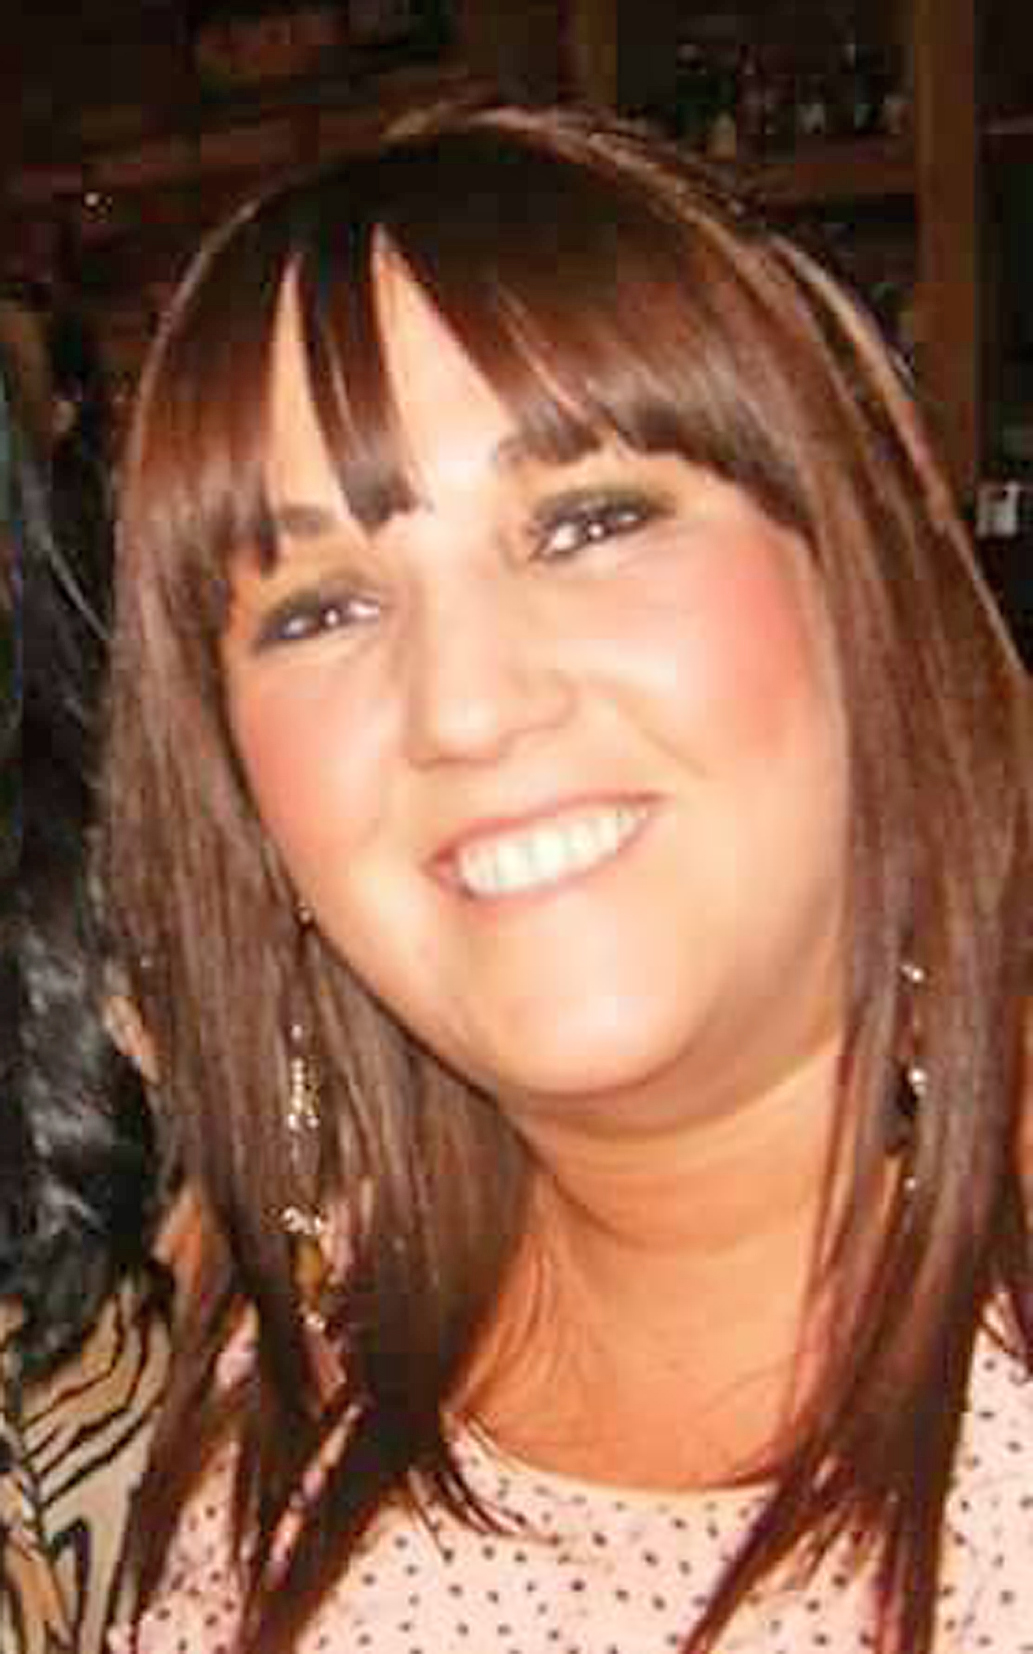 Jennifer Dornan was found stabbed inside her home at Hazel View in the Lagmore area